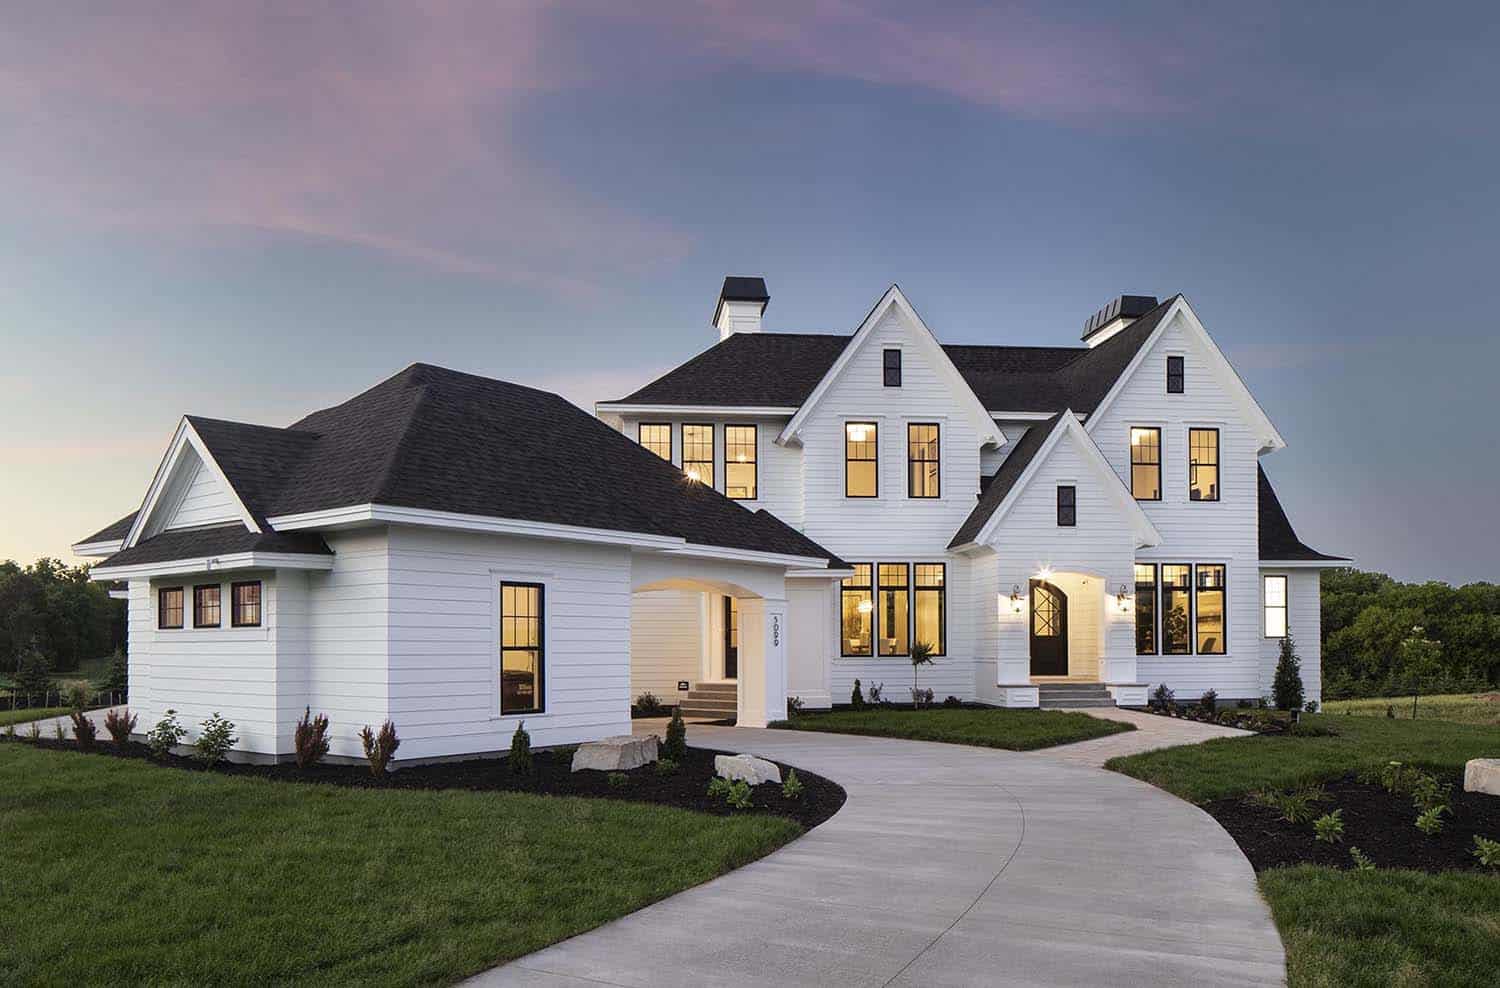 Tour this exceptional Minnesota home with elegant and timeless design details